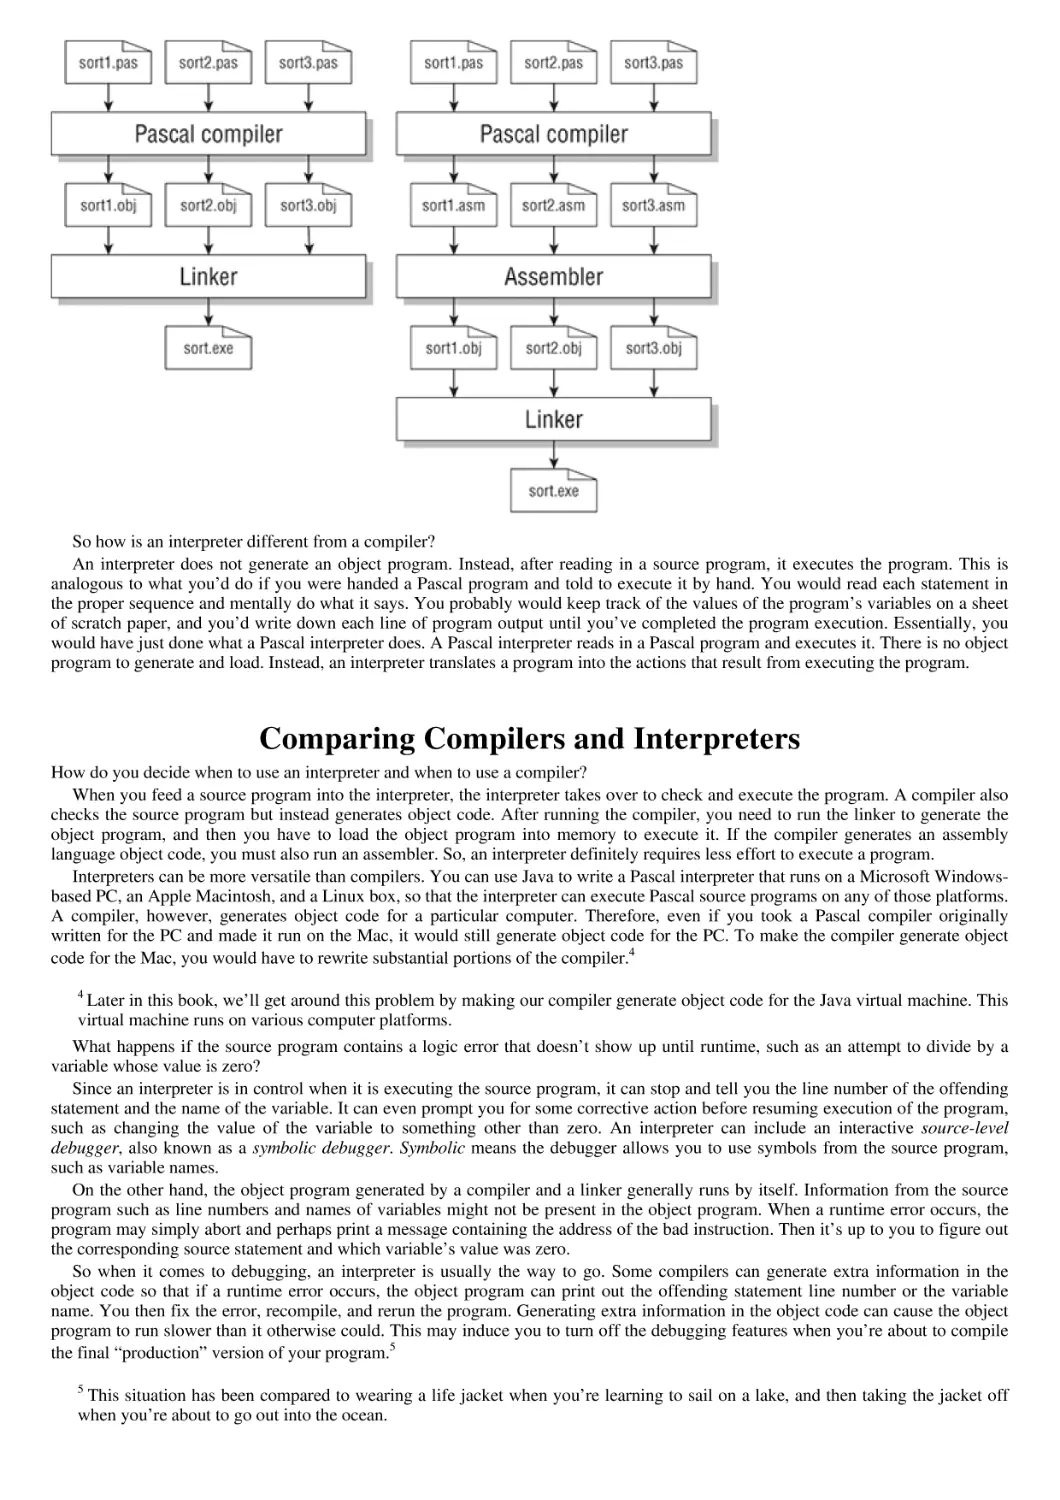 Comparing Compilers and Interpreters